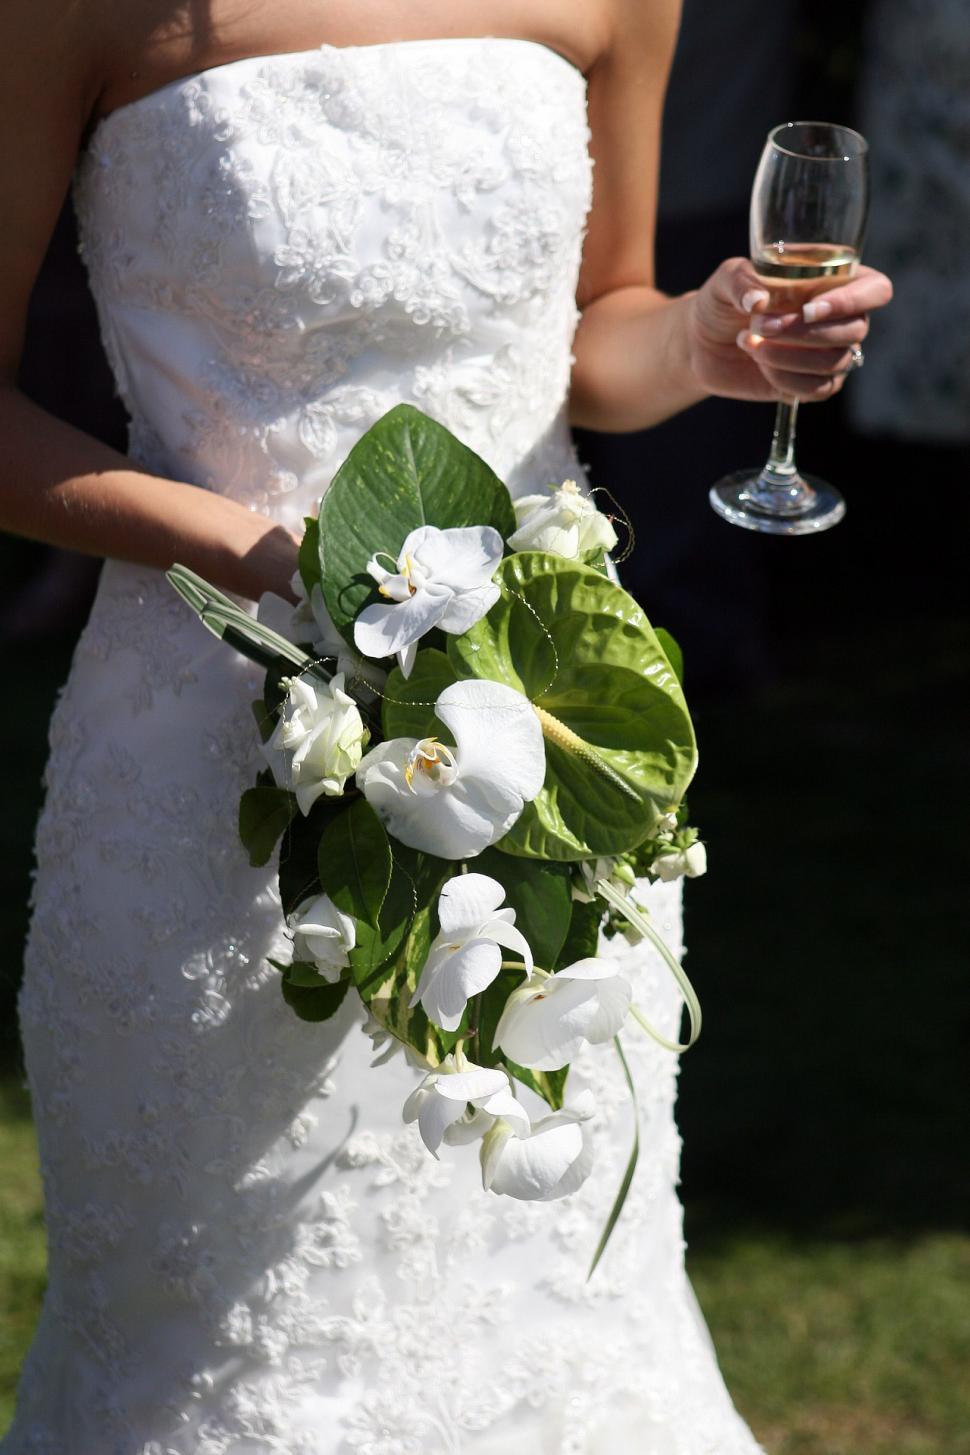 Free Image of Woman in Wedding Dress Holding Glass of Wine 